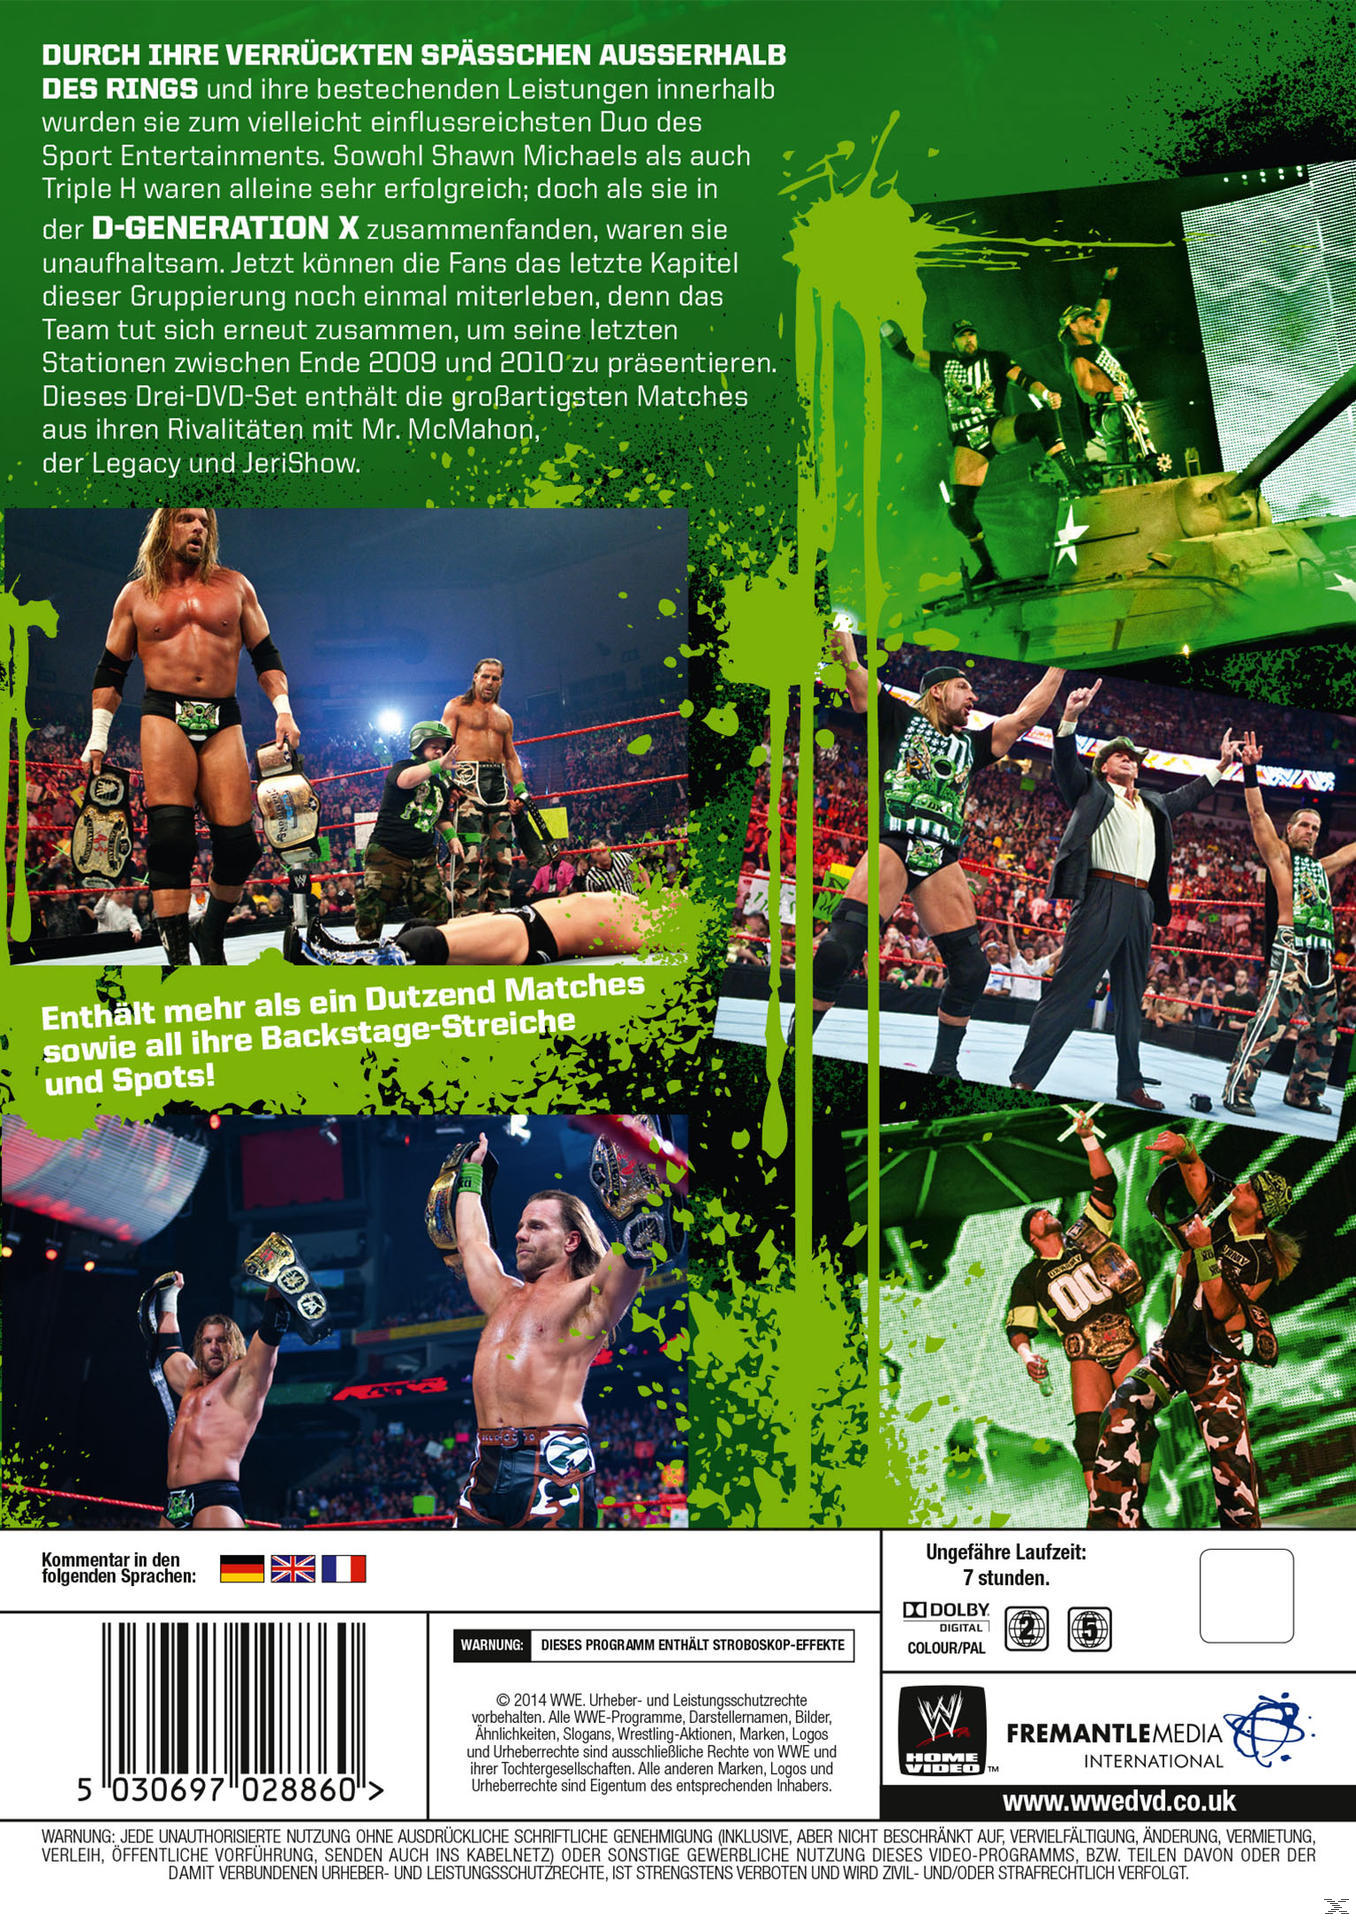 DX Stand DVD Last - One